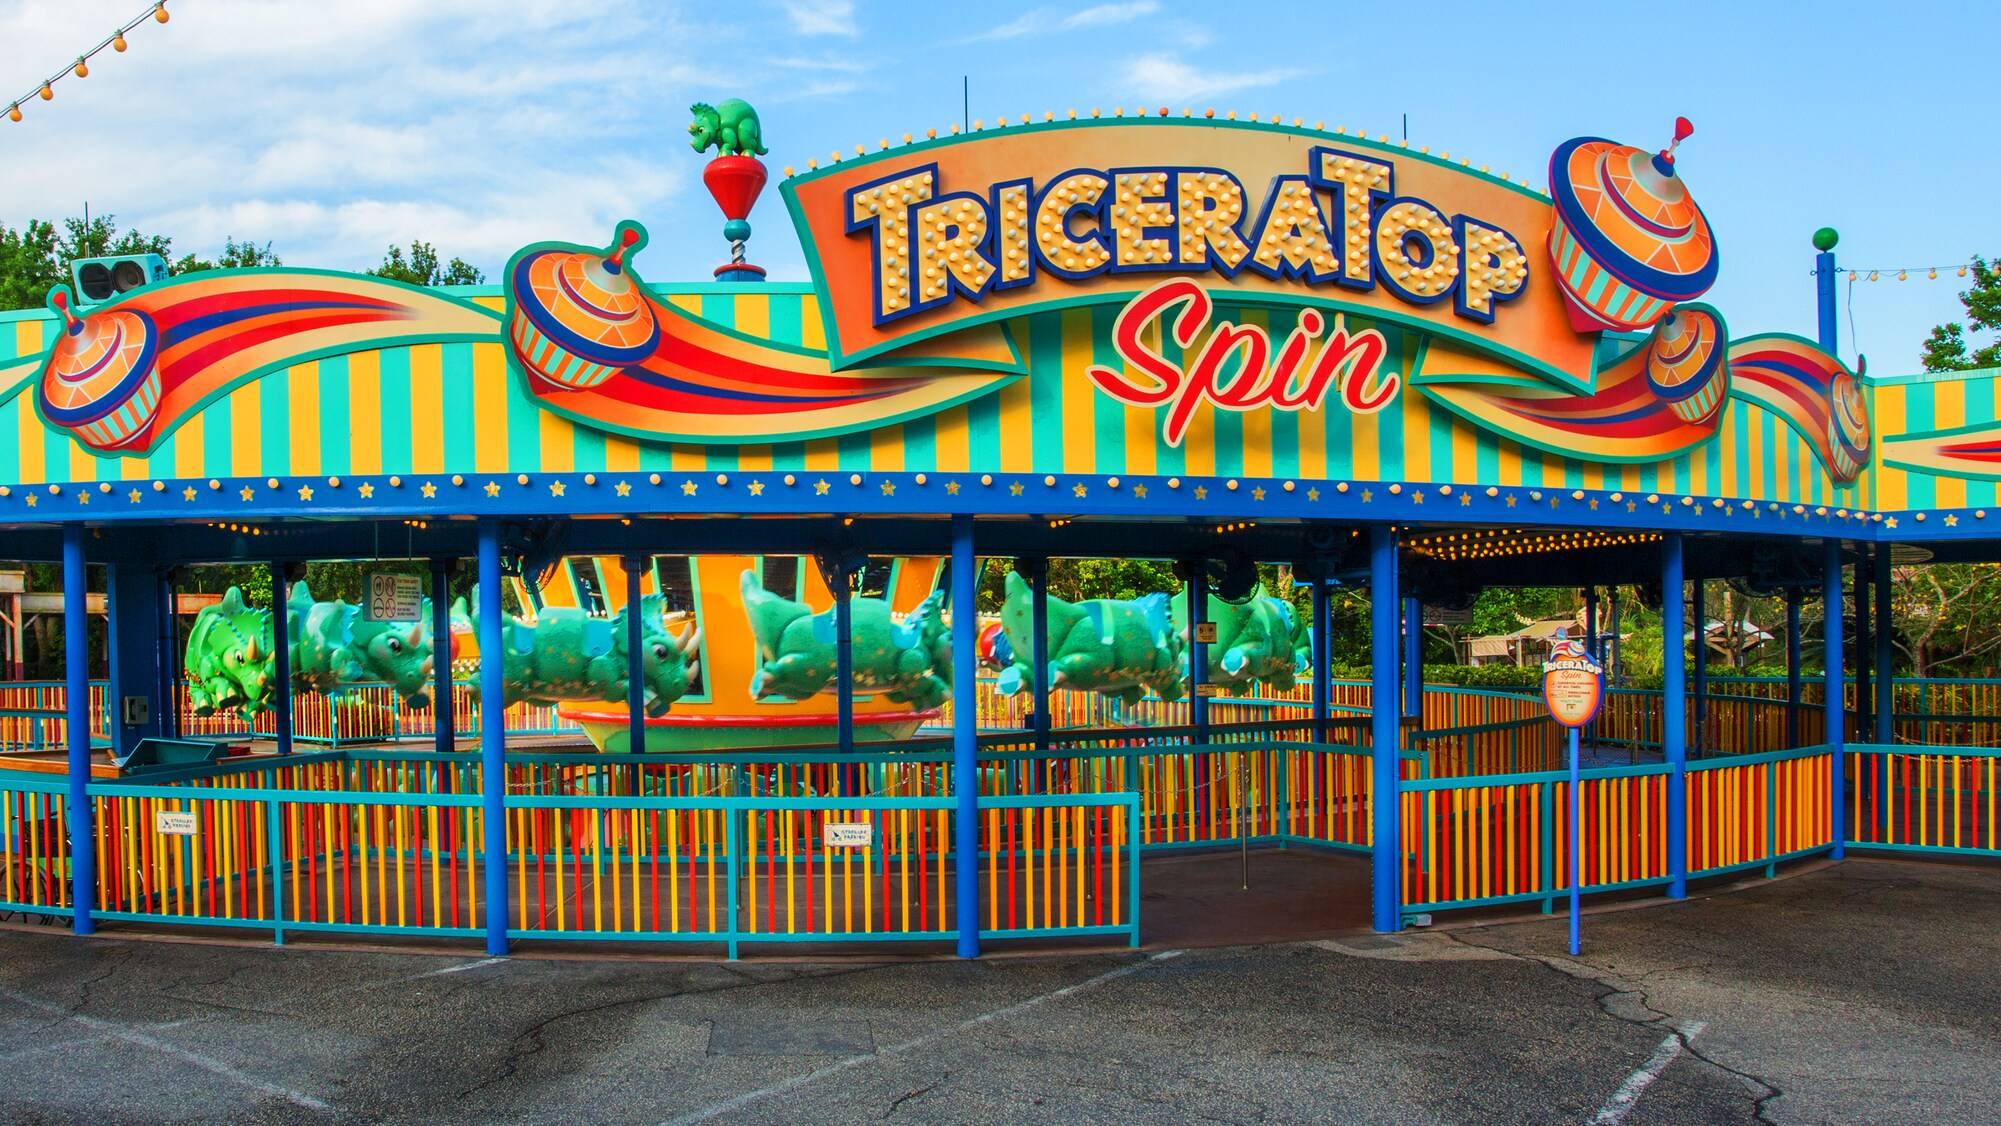 TriceraTop Spin at Disney's Animal Kingdom closing for short refurbishment this month